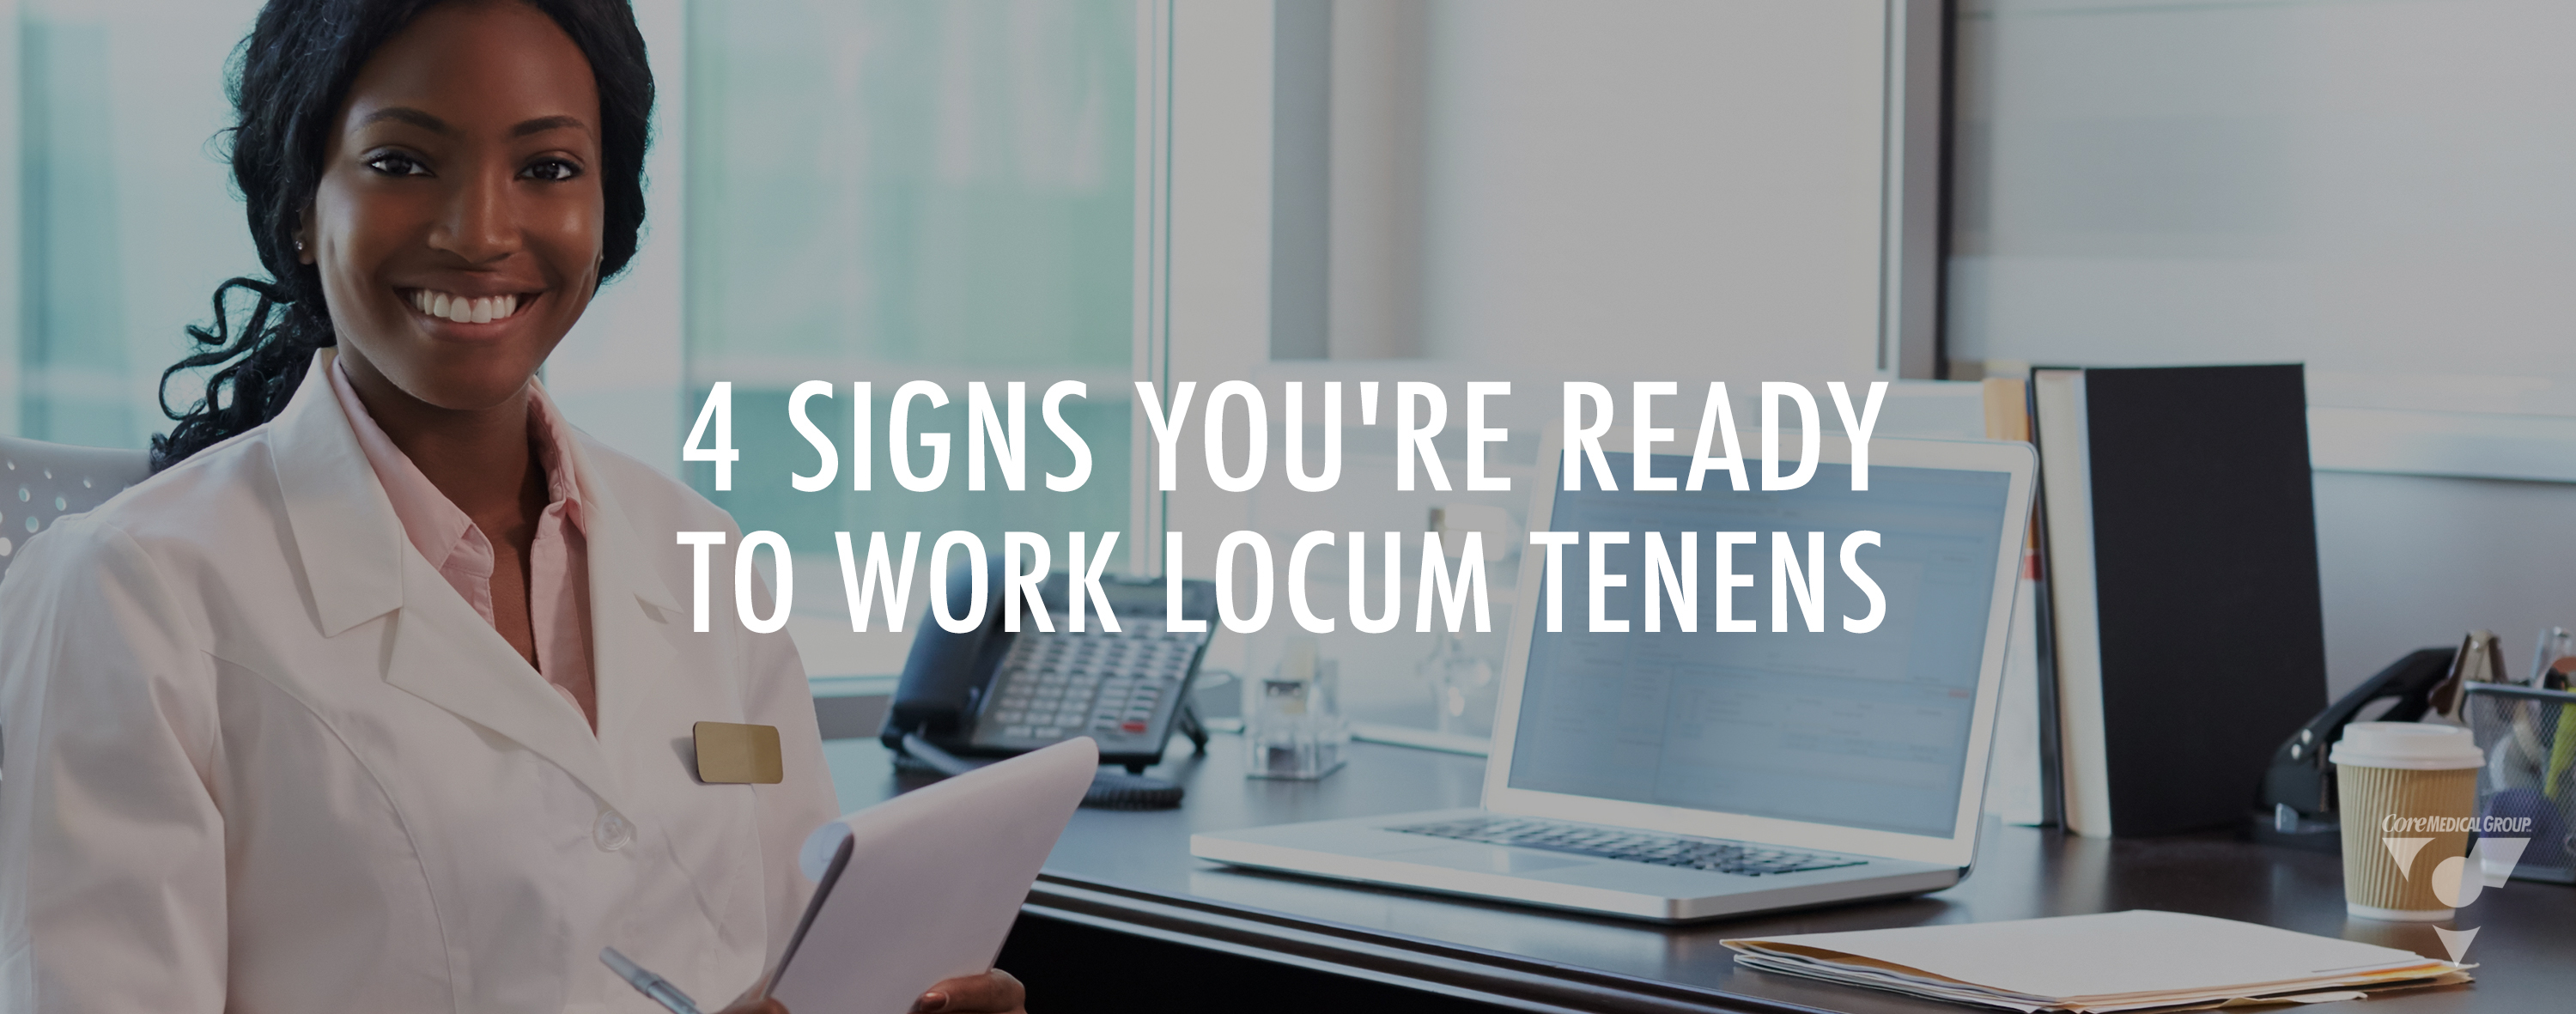 Four signs youre ready to work locum tenens core medical group